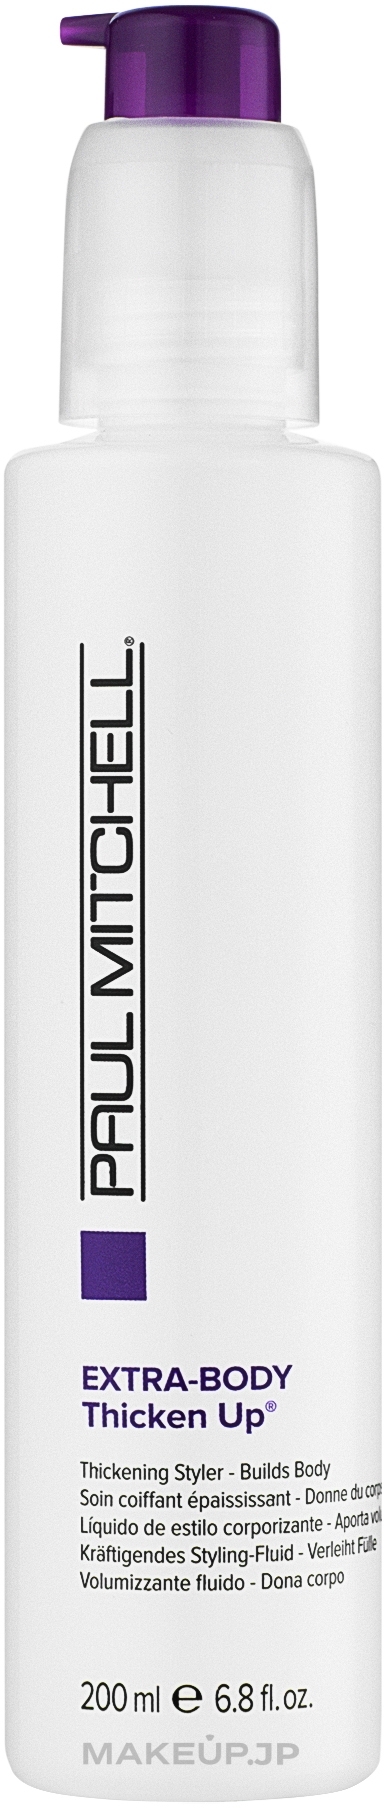 Styling Volume Lotion - Paul Mitchell Extra-Body Thicken Up — photo 200 ml